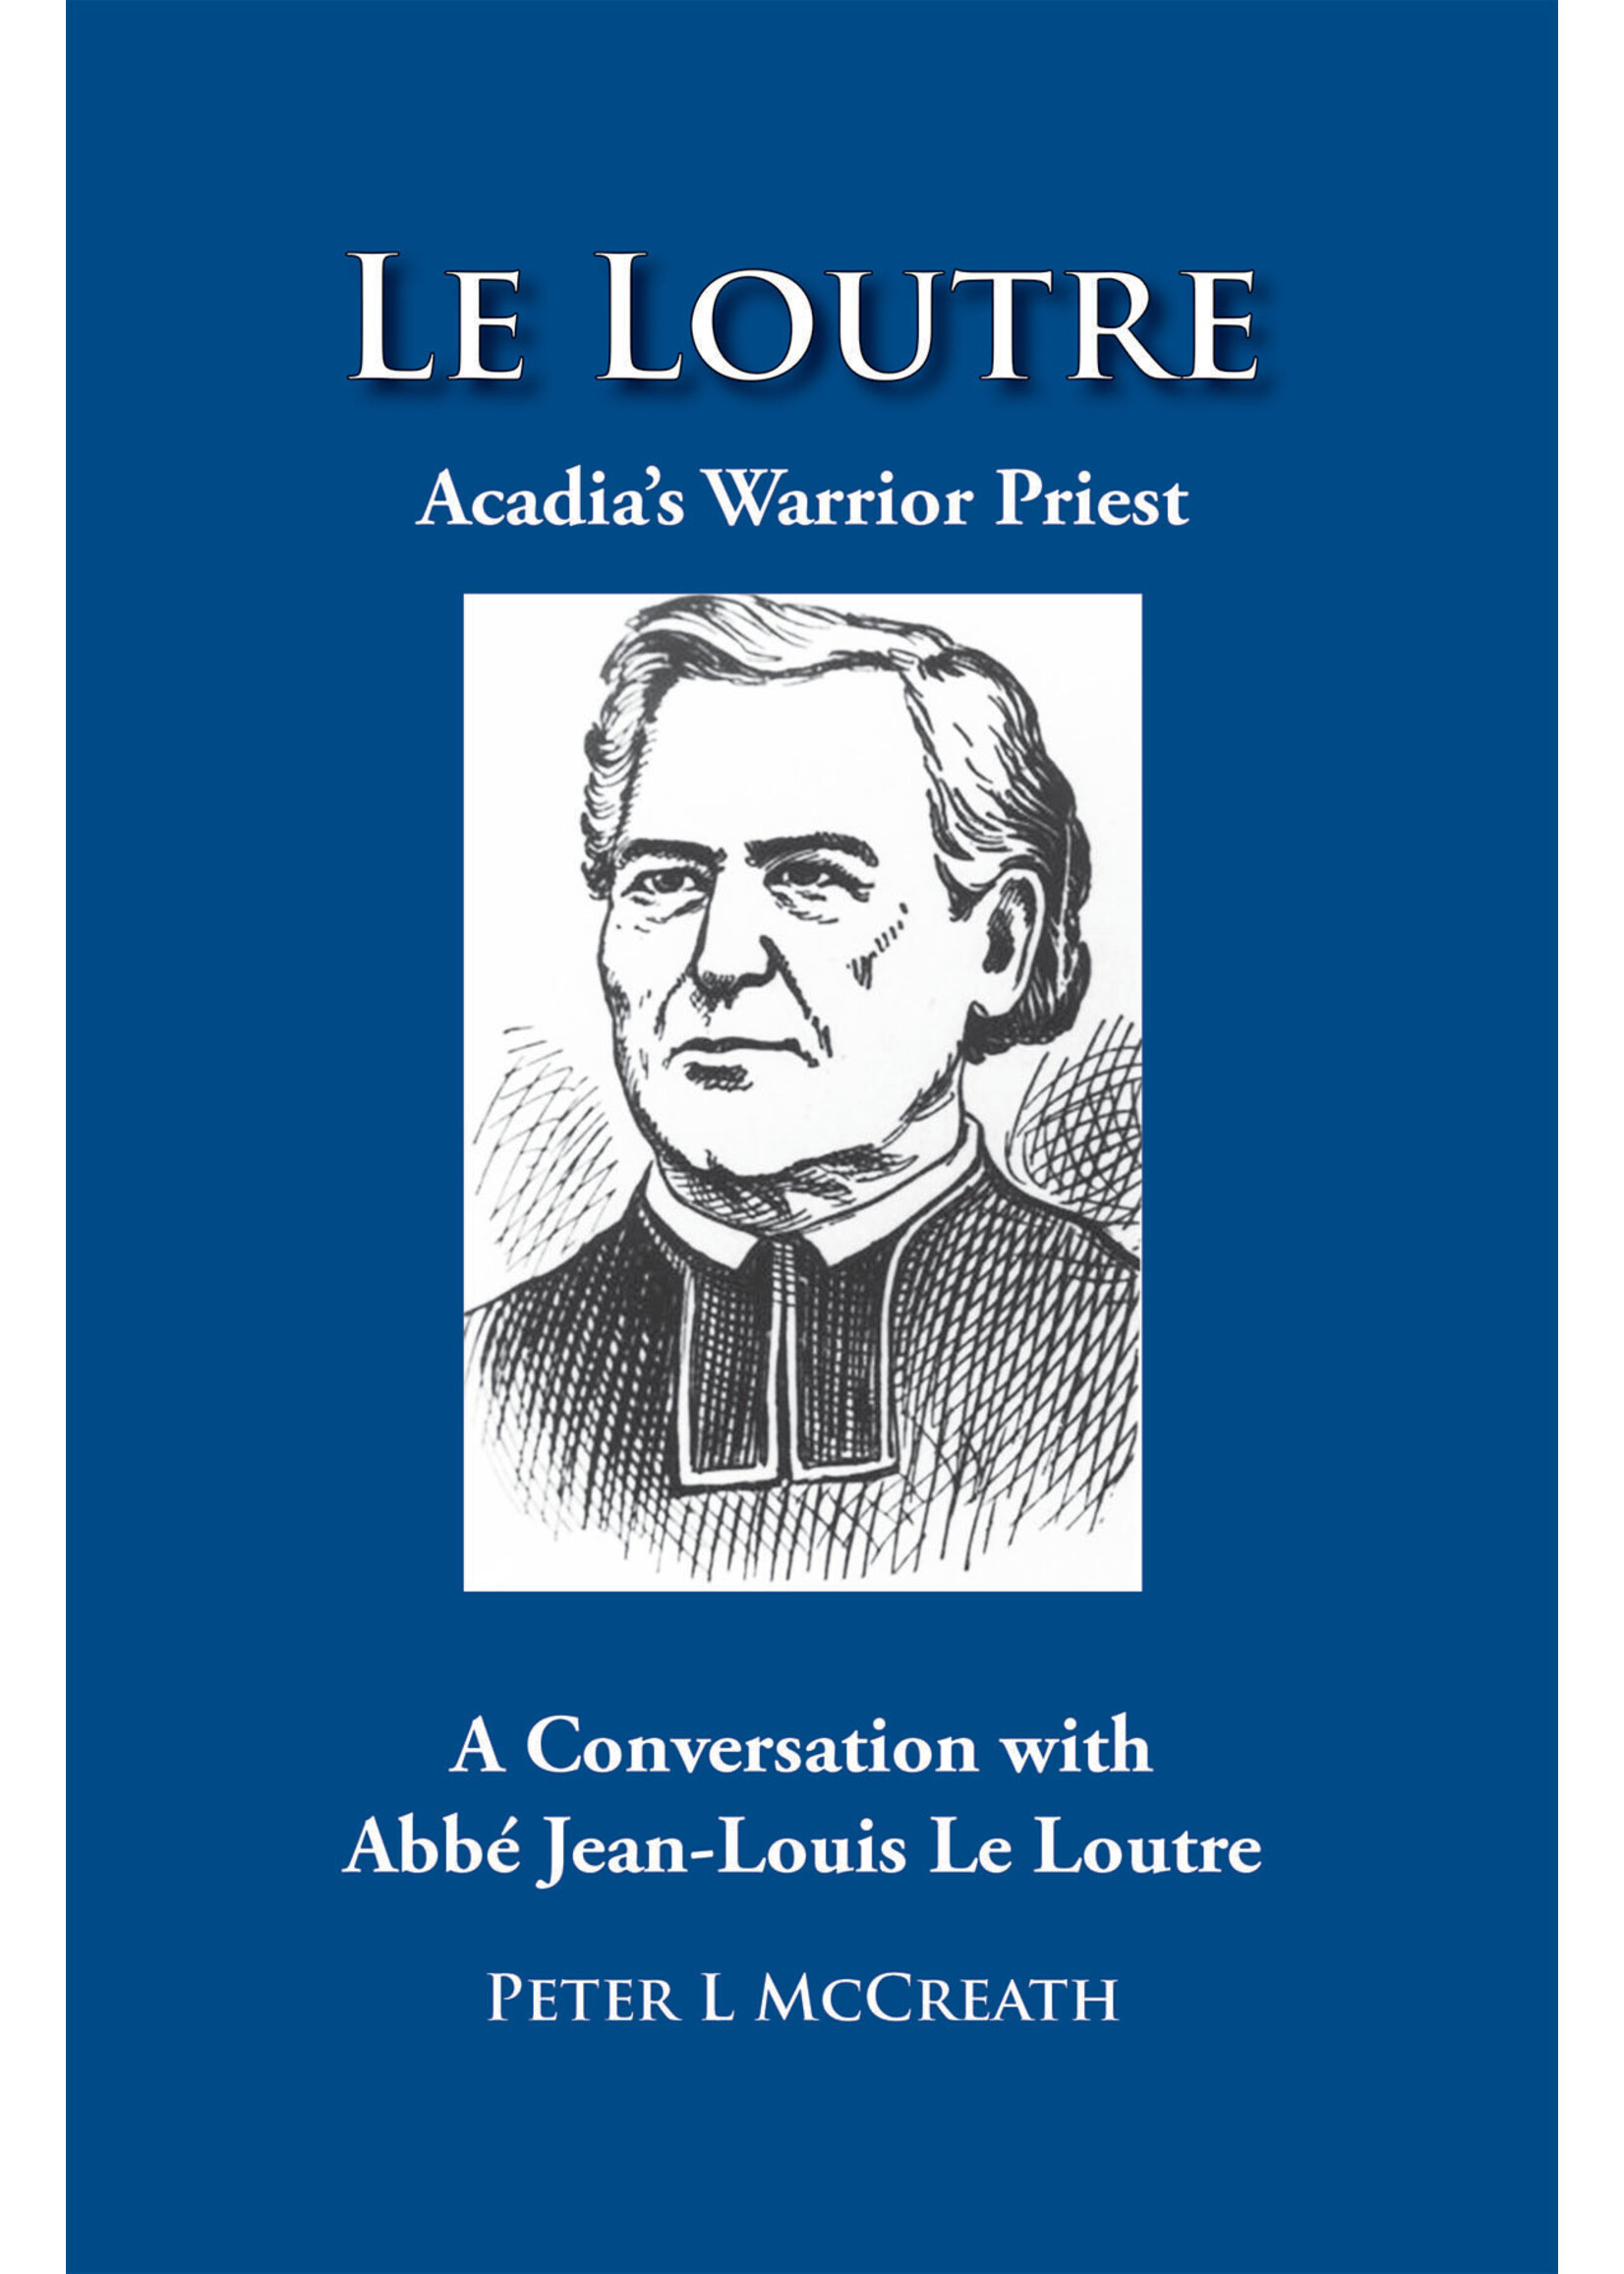 Le Loutre: Acadia's Warrior Priest by Peter L. McCreath